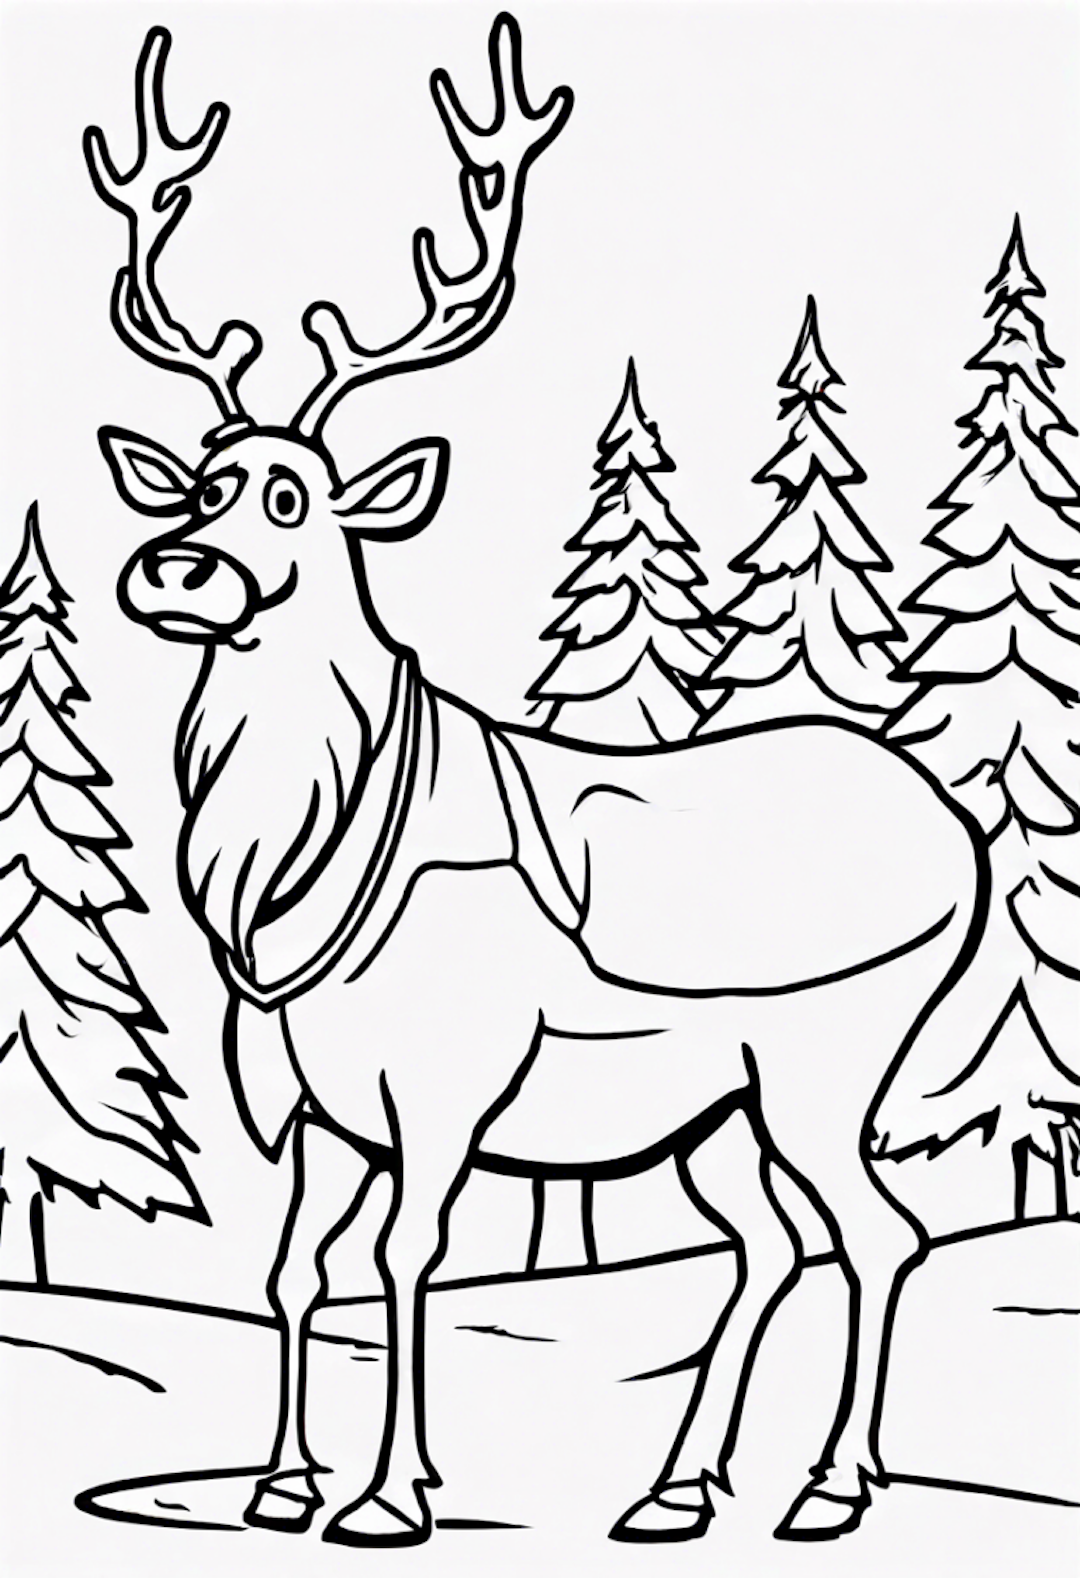 Santa And His Reindeer coloring pages